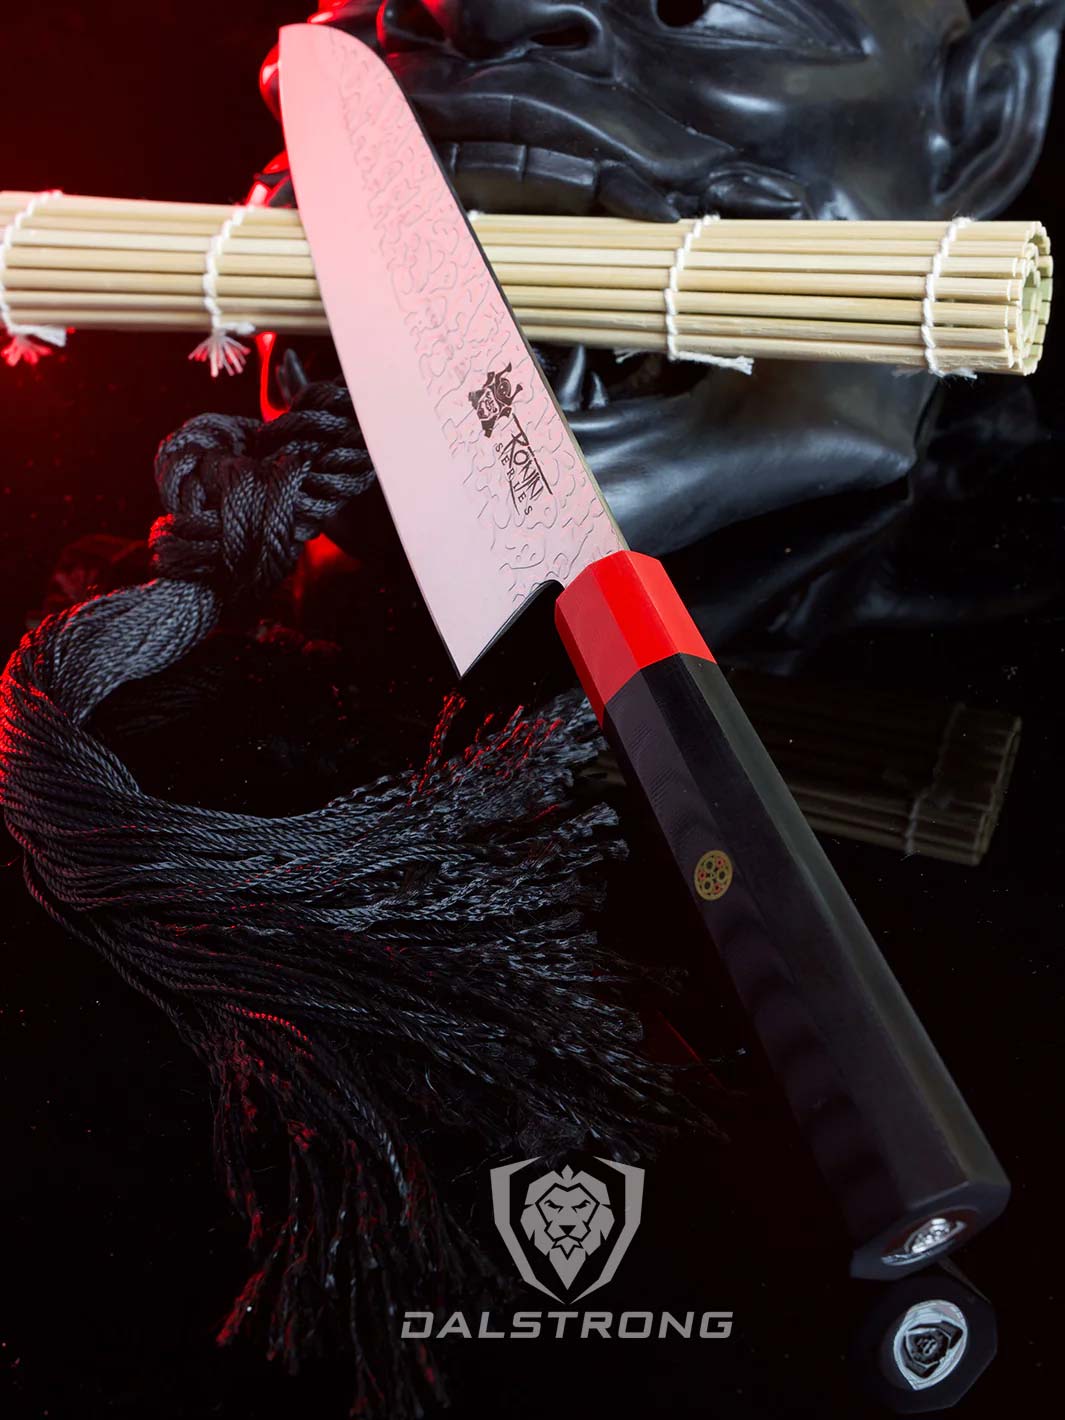 Dalstrong ronin series 7 inch santoku knife with black handle and a oni mask beside.